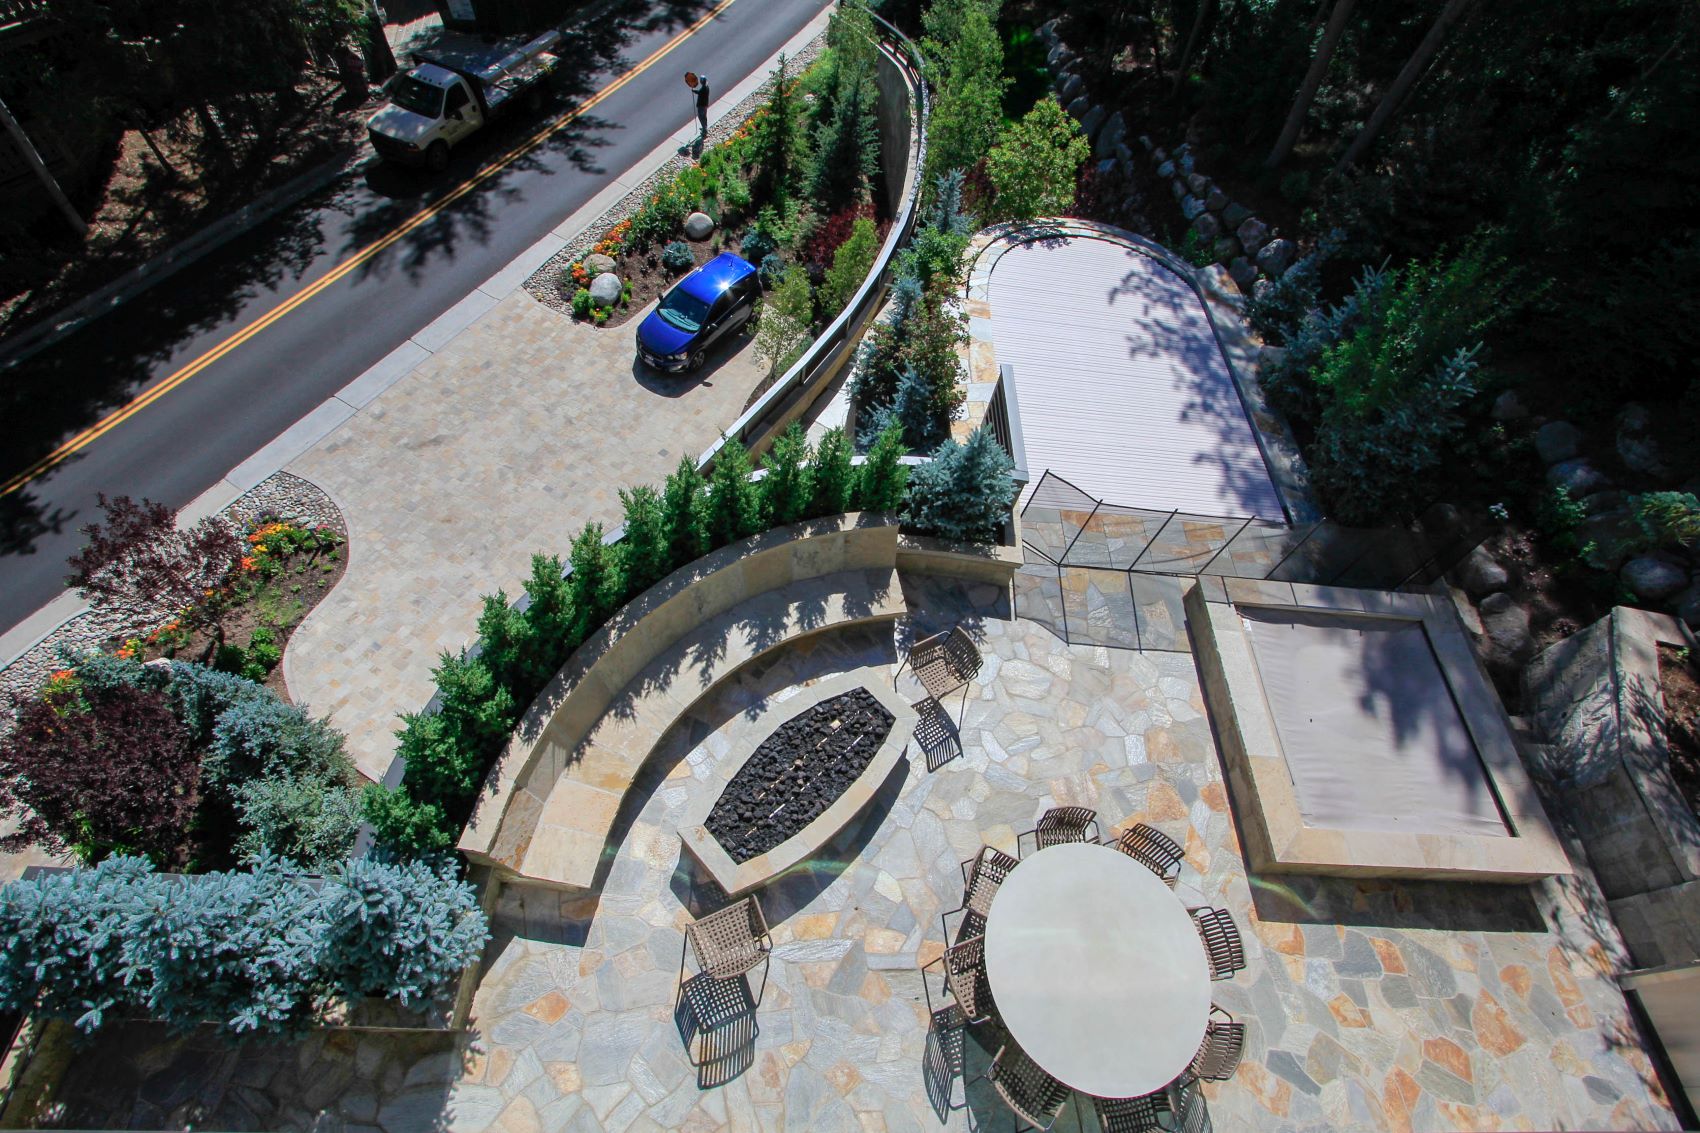 Aerial view of a landscaped terrace with a fire pit, seating area, and a road with a blue car and a person walking nearby.